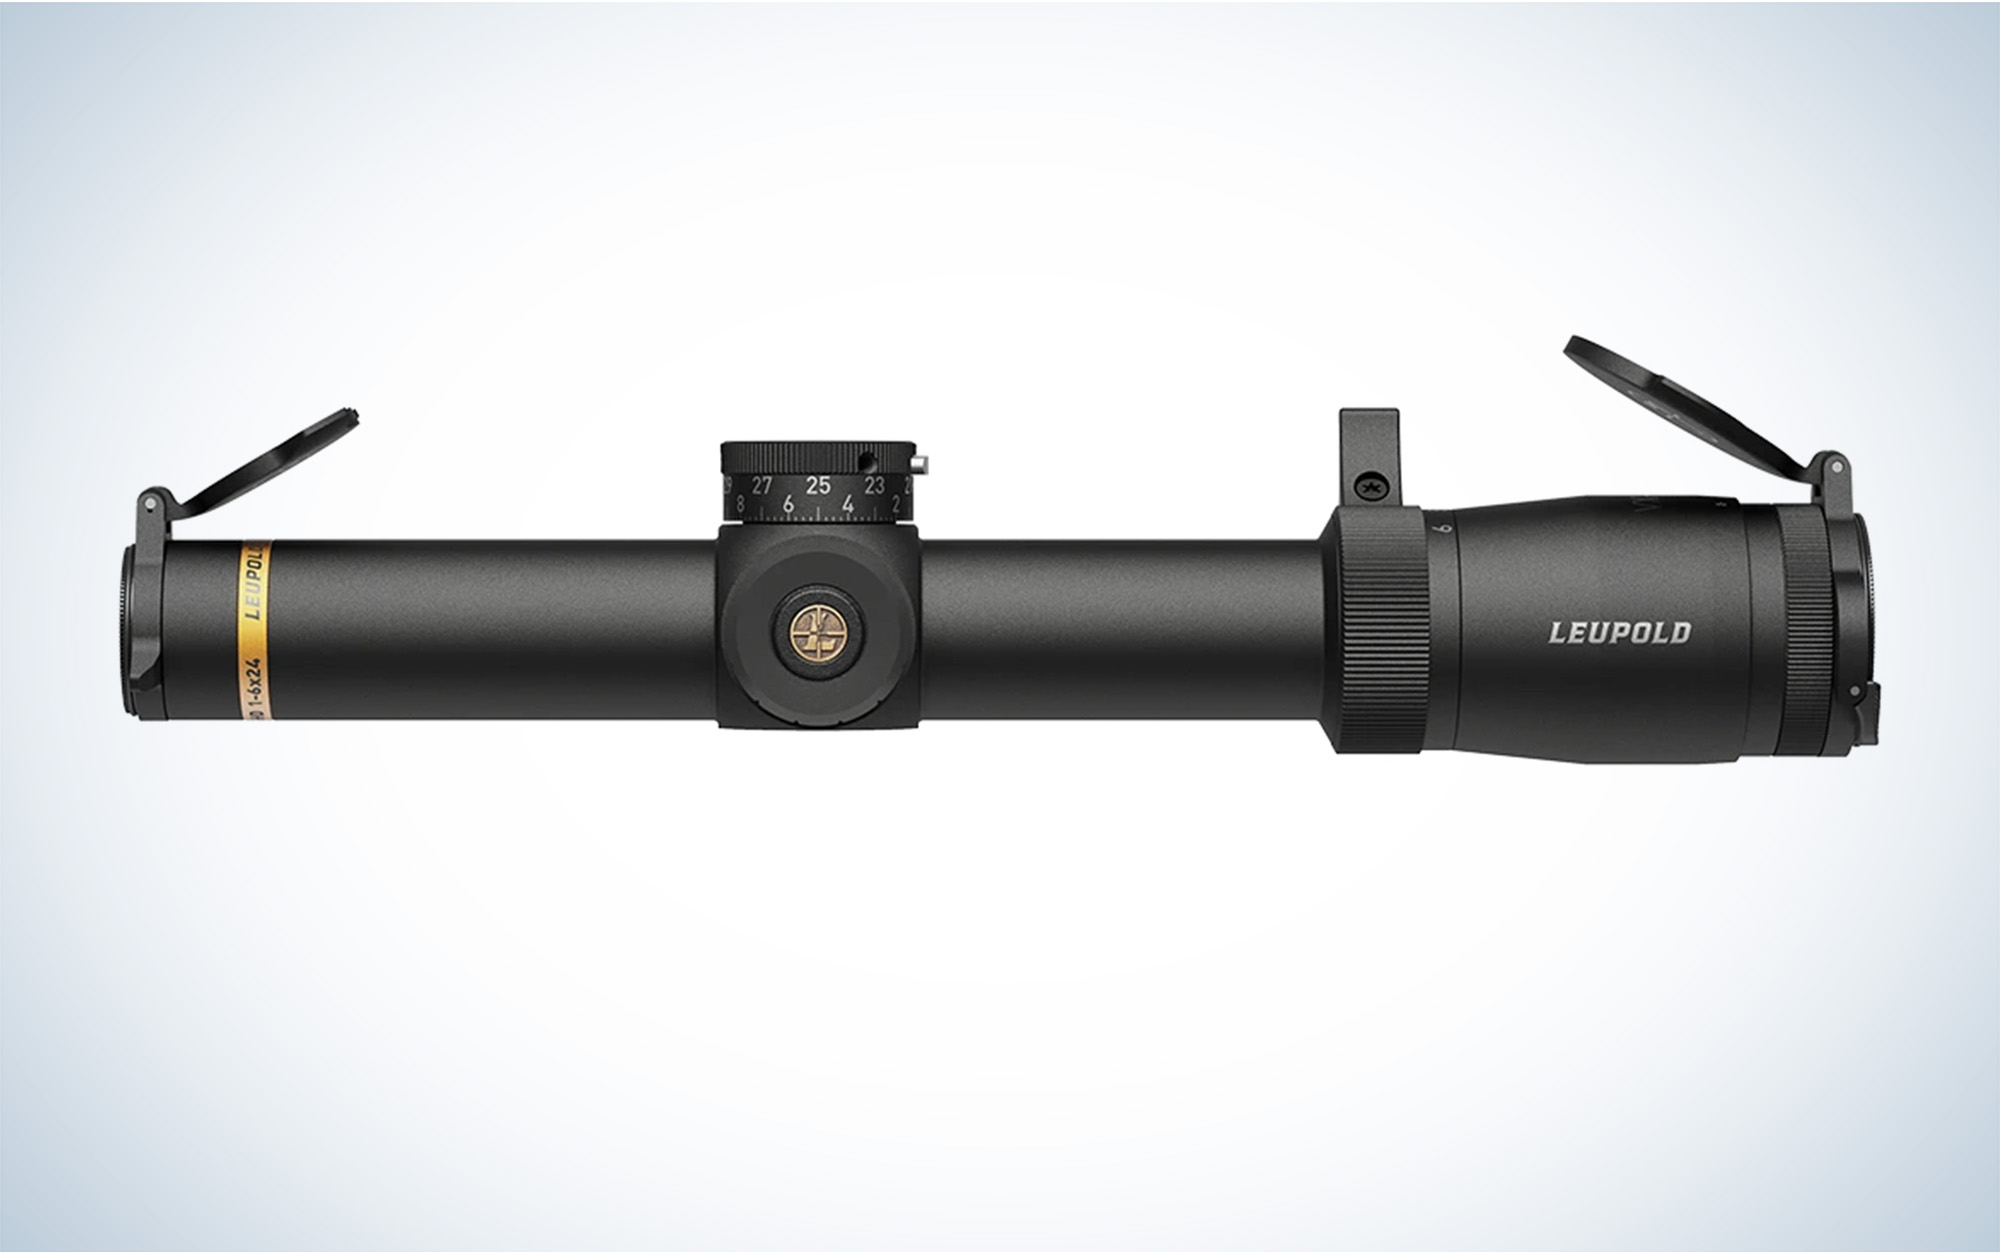 The Leupold VX 6D has a bright center dog and 1 to 6X magnification